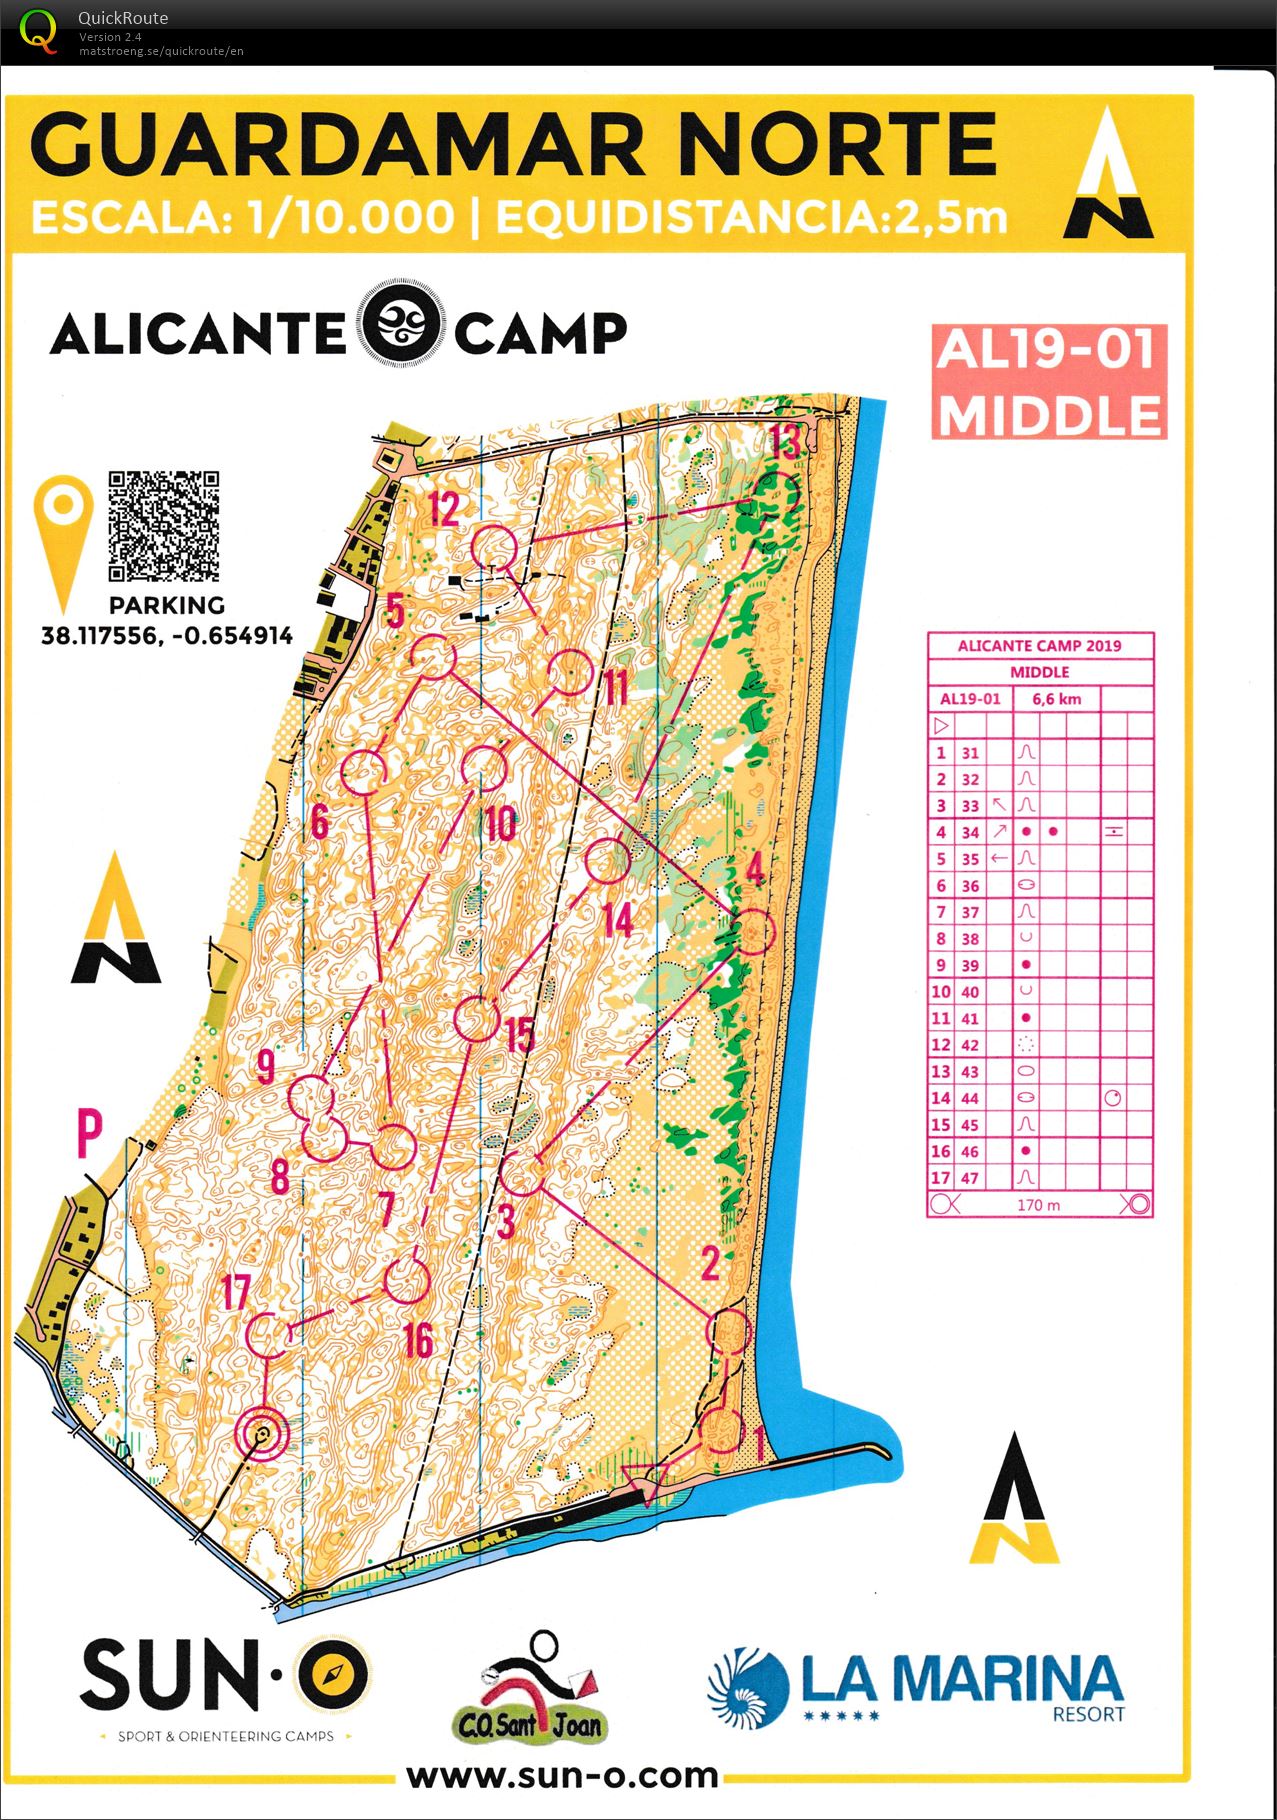 TC Alicante #7, middle rychle (2019-01-23)